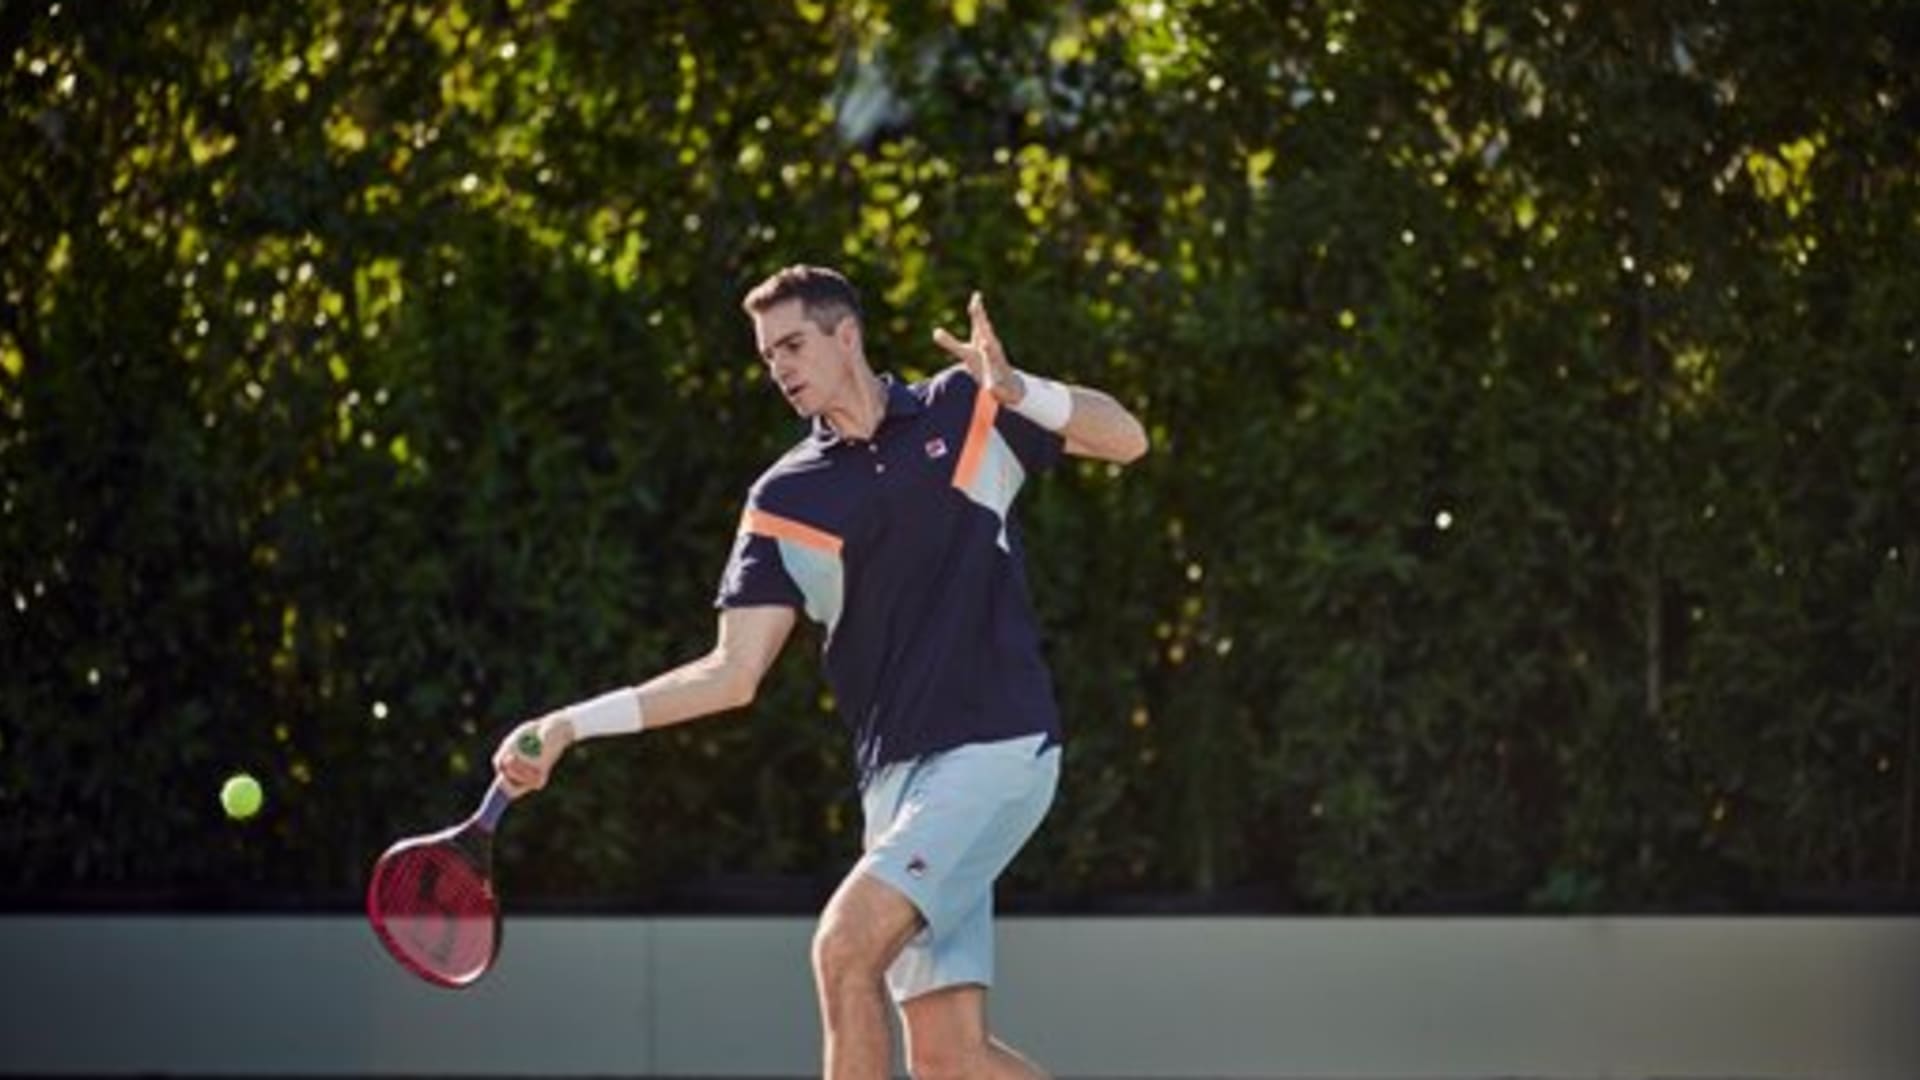 Fila debuts two new collections ahead of the Australian Open